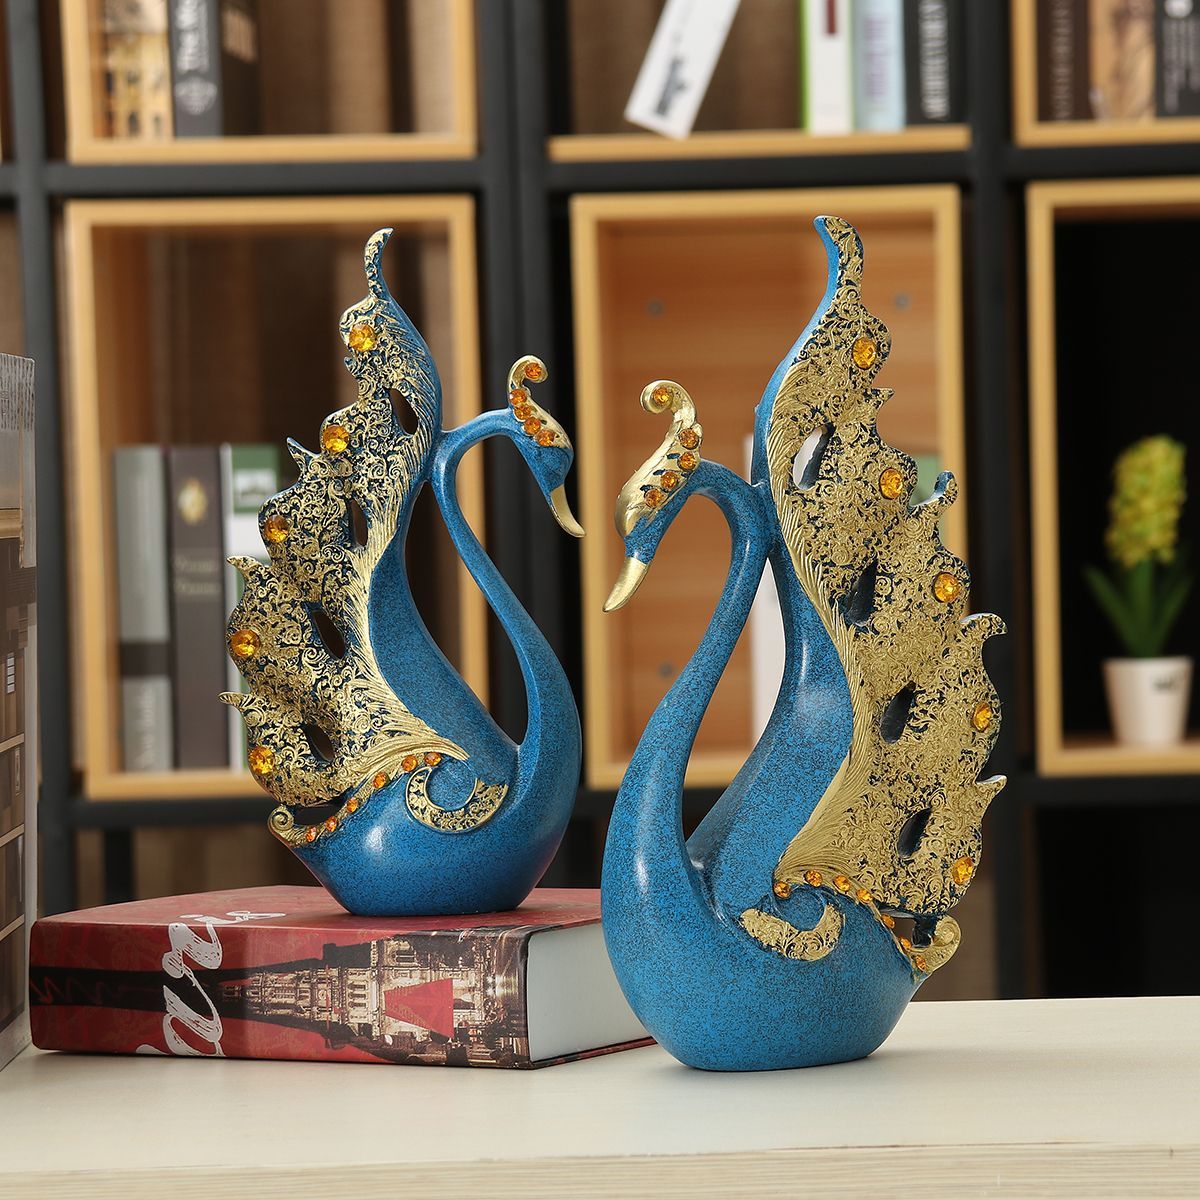 2Pcs-Swan-Ornaments-Resin-Figurine-Home-Room-TV-Cabinet-Display-Decorations-1557363